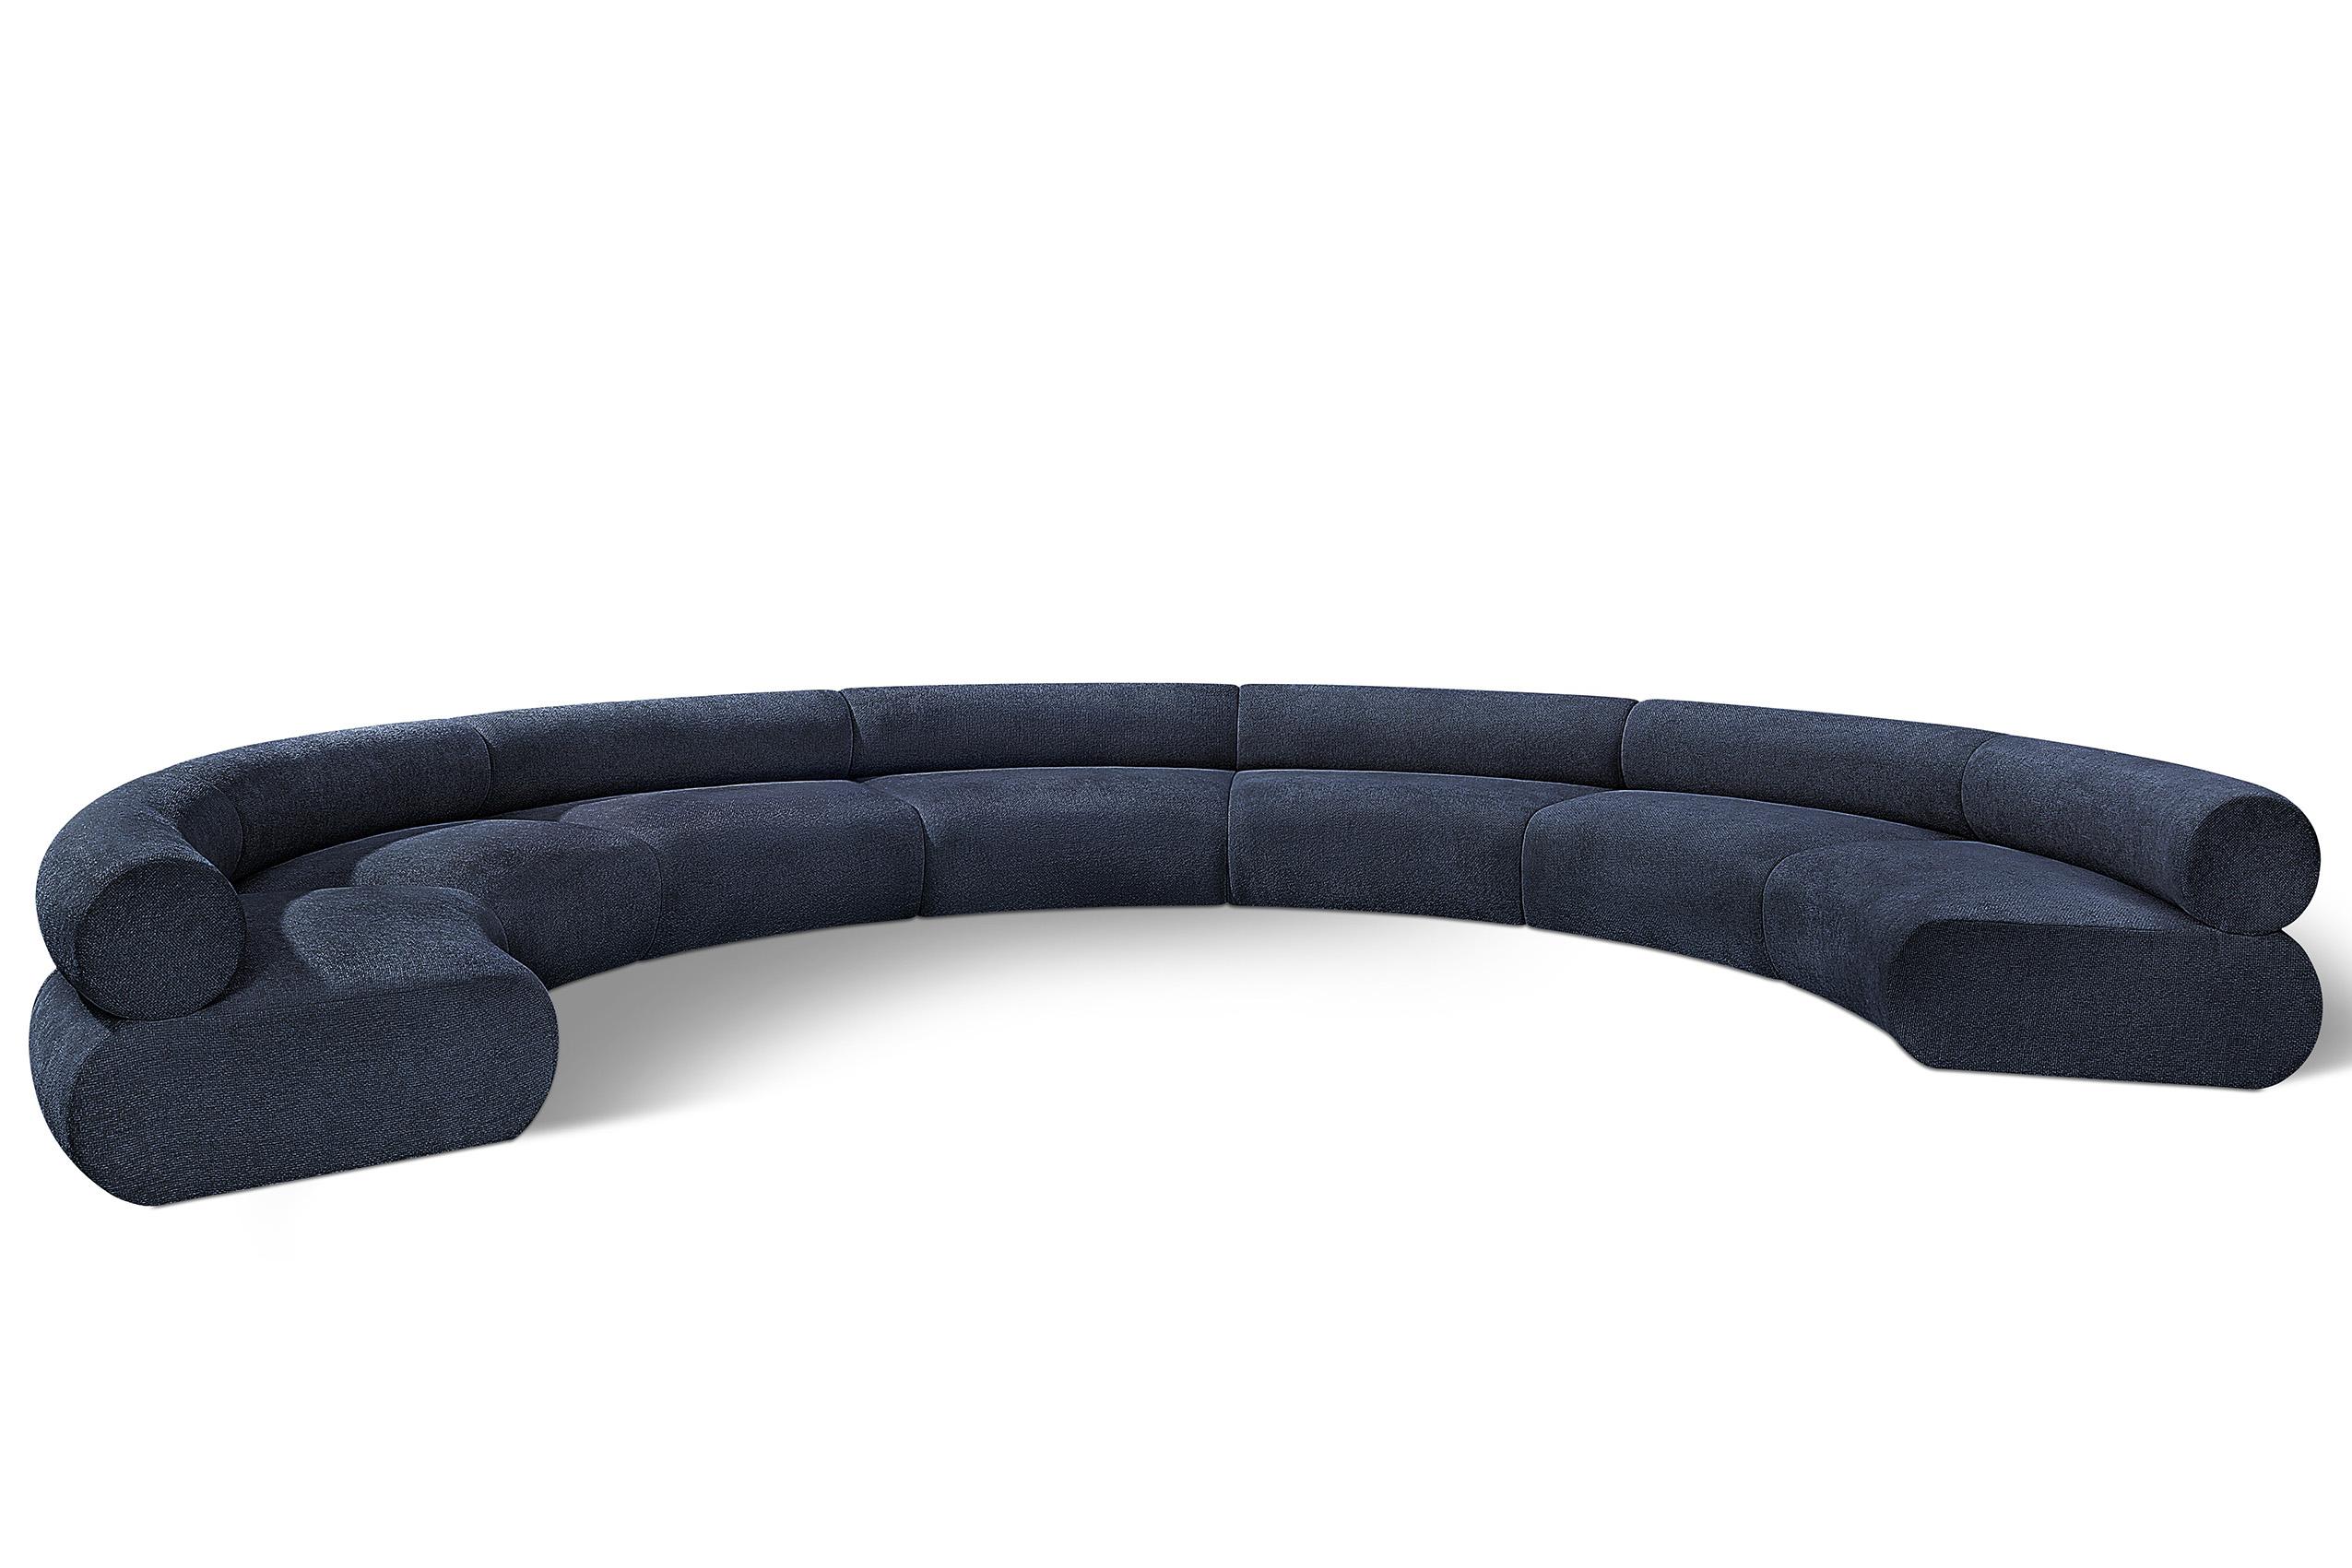 Contemporary, Modern Modular Sectional Sofa Bale 114Navy-S7A 114Navy-S7A in Navy Chenille